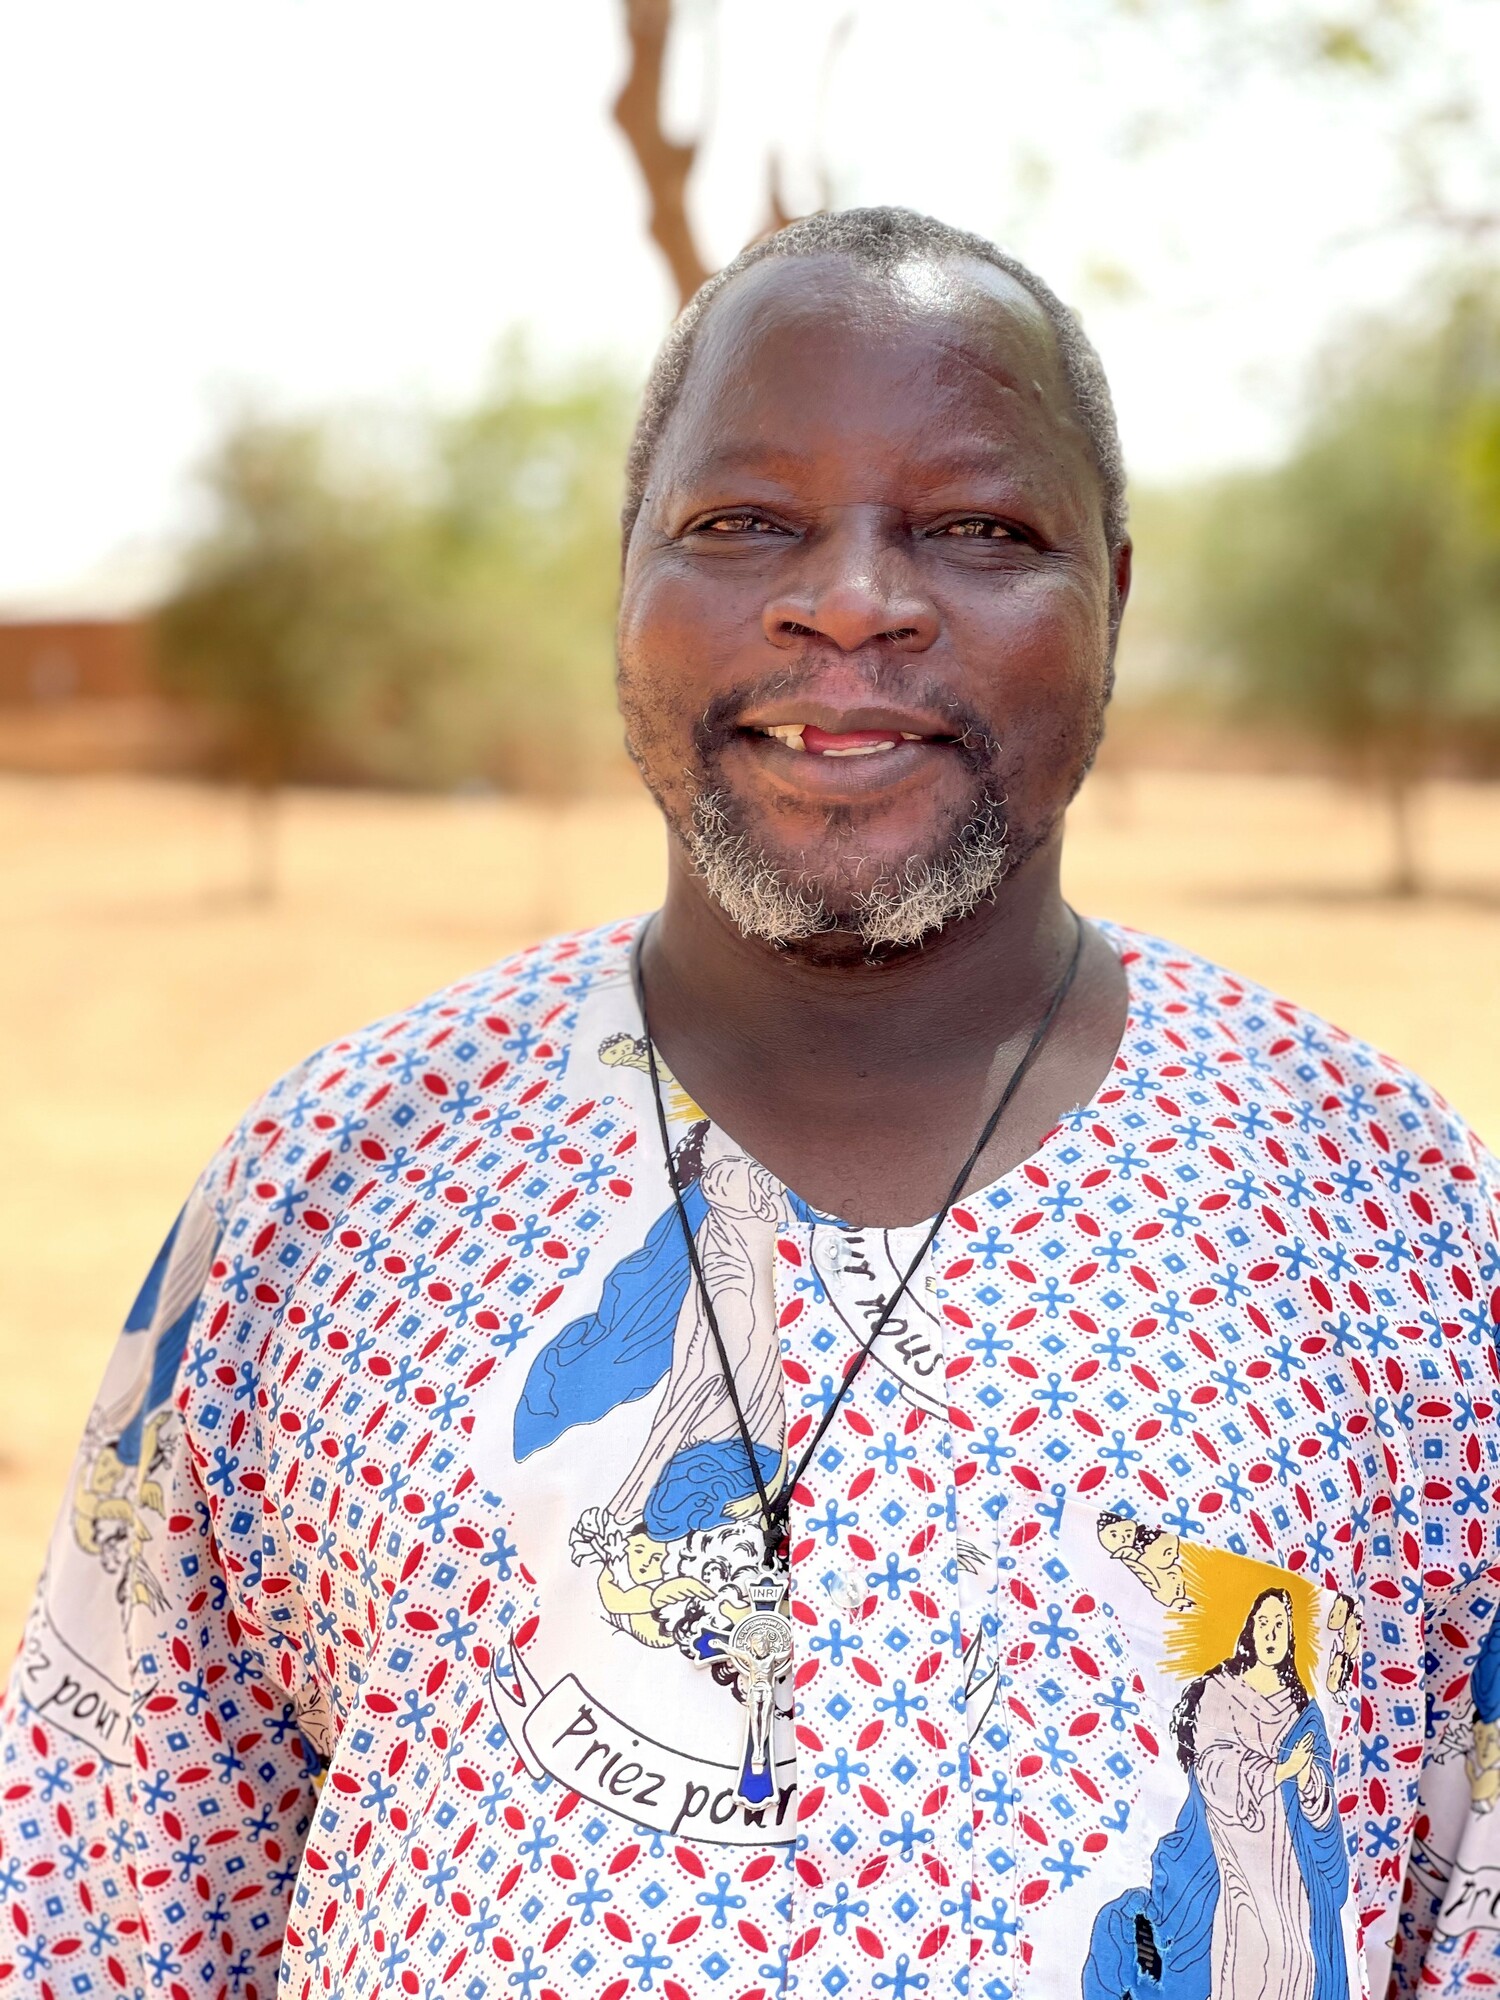 A portrait of a priest in Burkina Faso. He is wearing a white, blue and red shirt